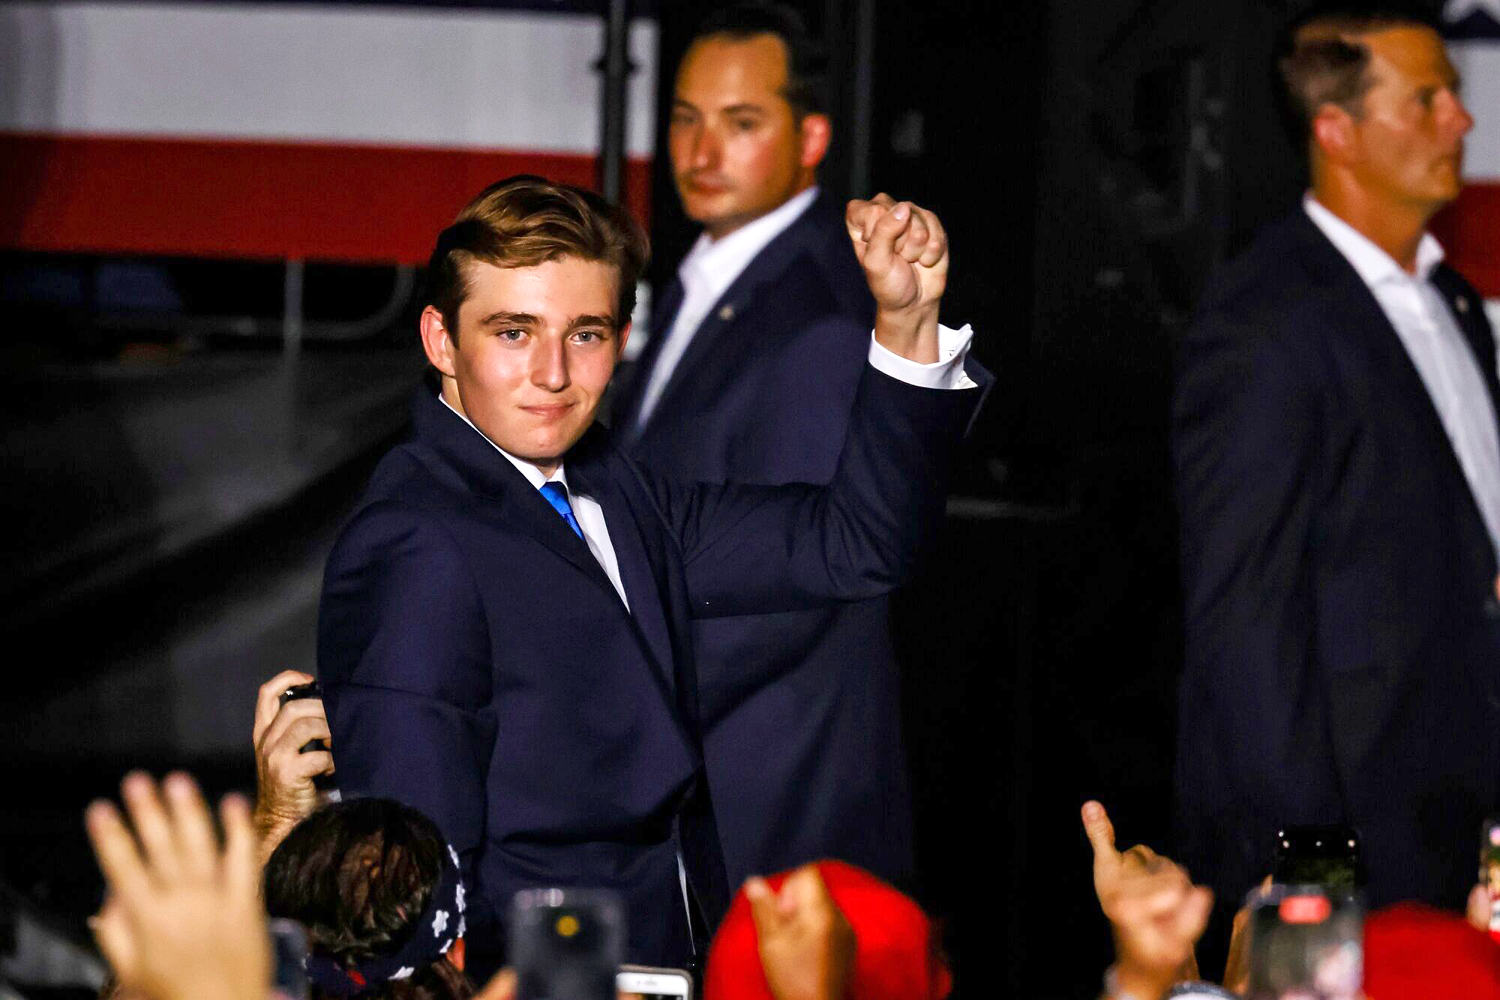 Barron Trump, initially expected at the RNC, was nowhere to be seen